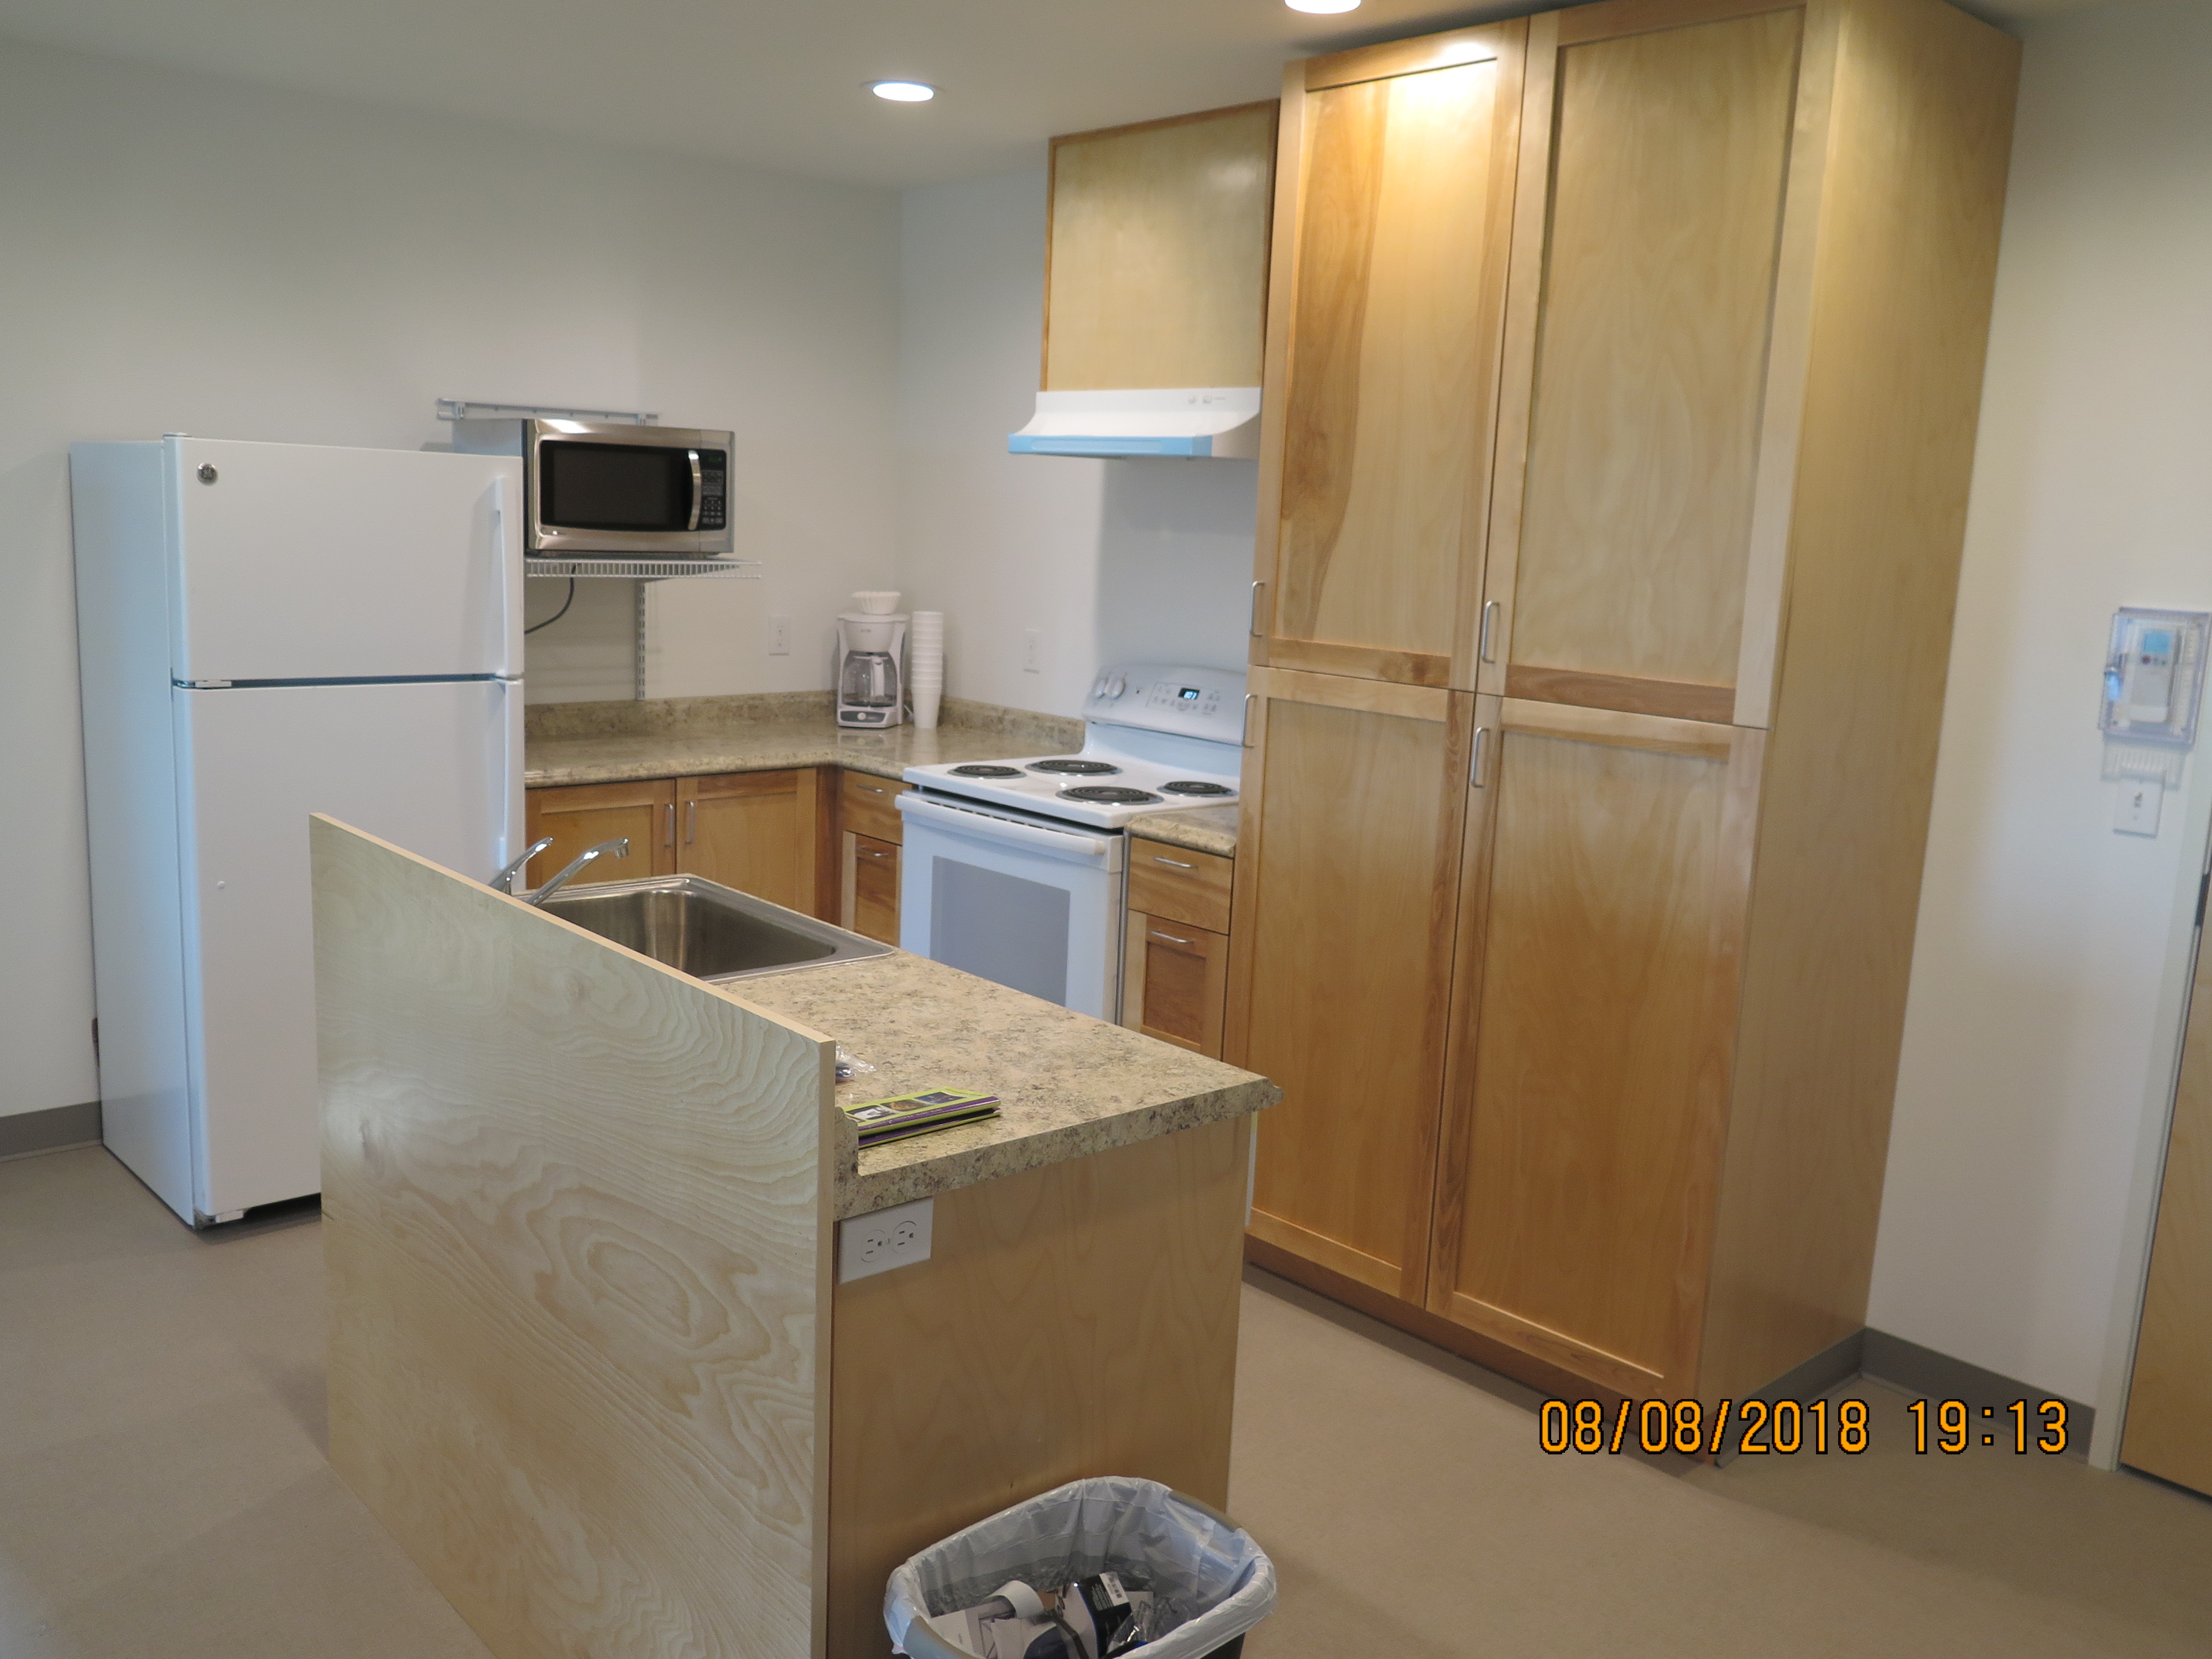 A view of the kitchen, showing sink, refrigerator, stove, microwave, and cabinets.